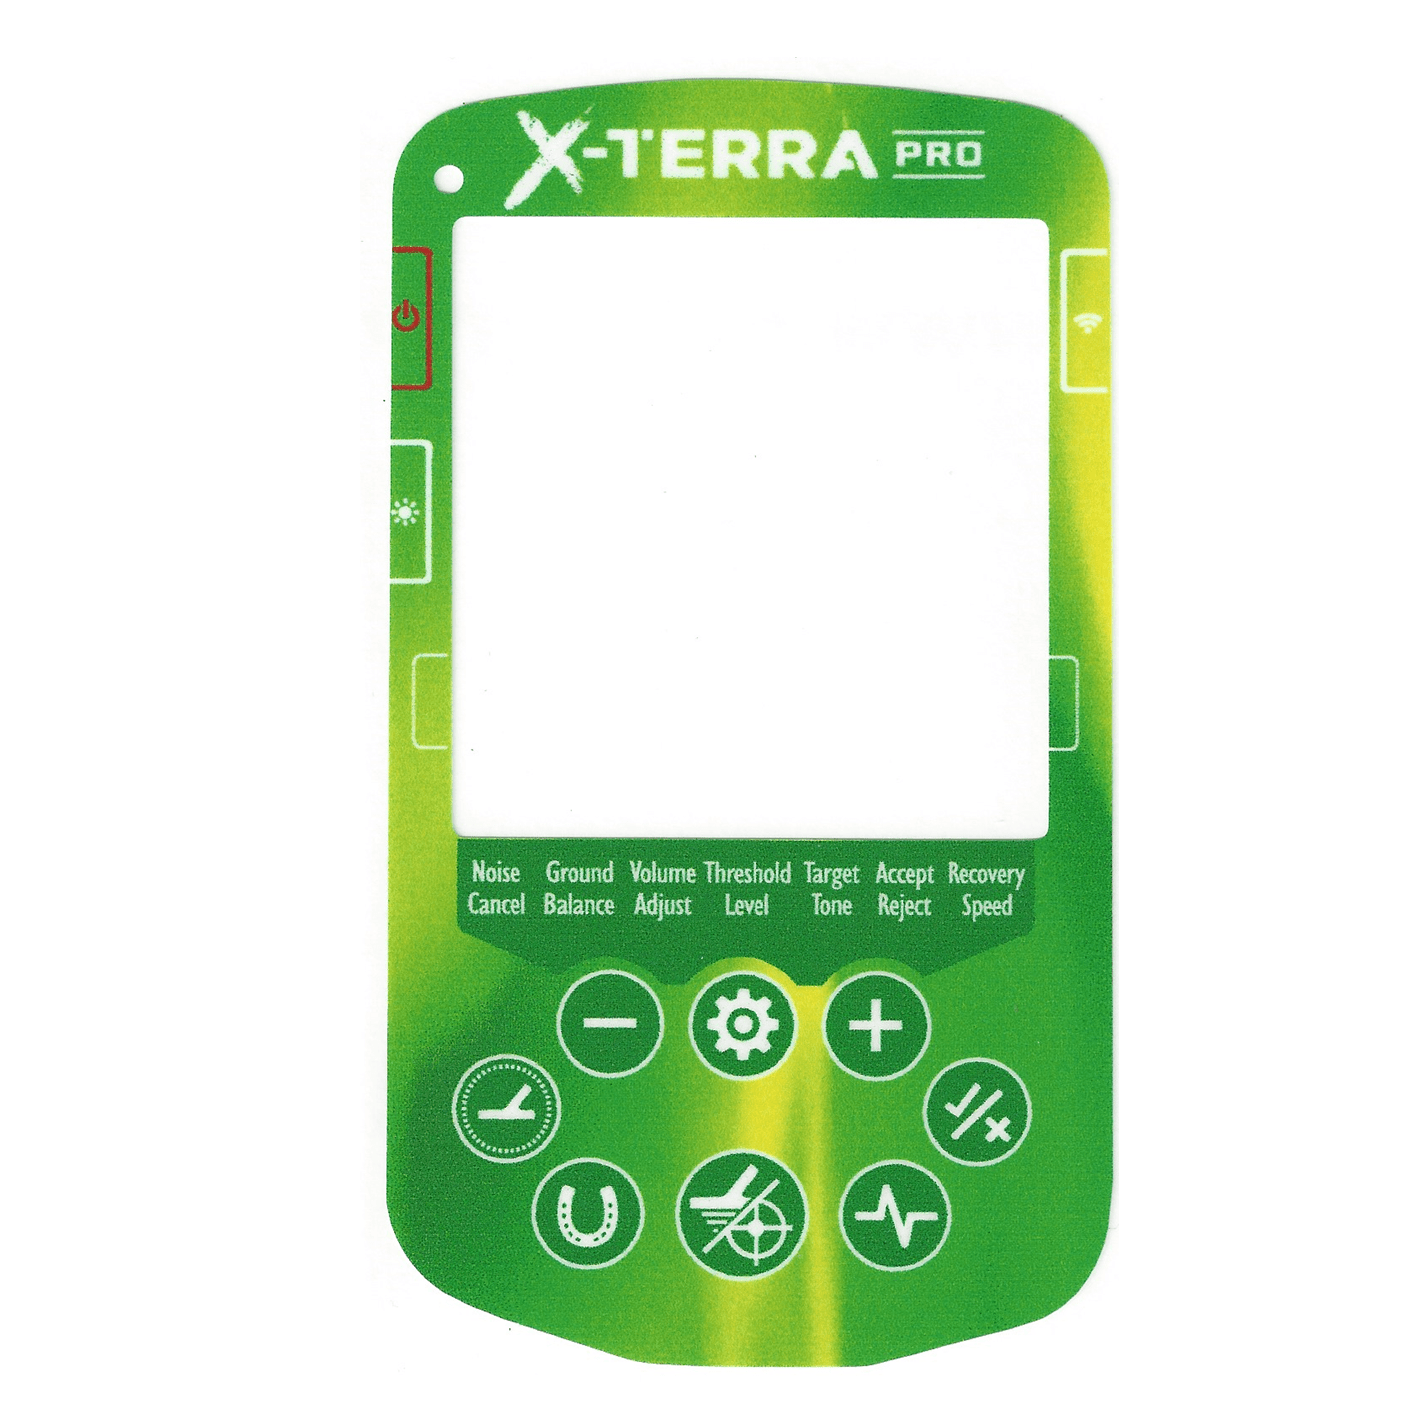 Detecting Innovations Keypad Stickers for the Minelab X-Terra Pro Metal Detector- Multiple Colors Available!